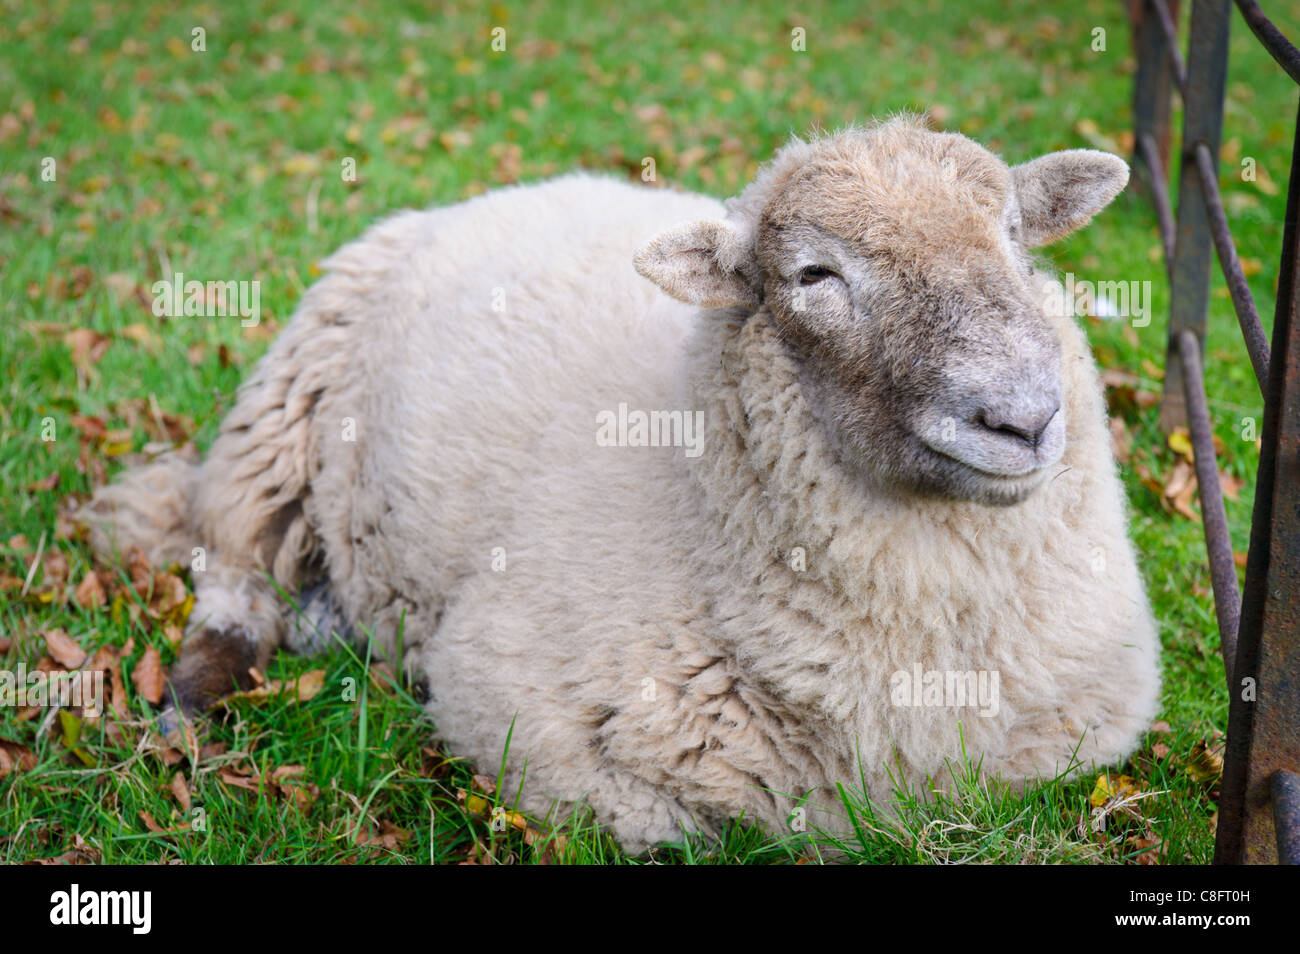 A sheep at rest at The National History Museum, St Fagans, Cardiff. Stock Photo